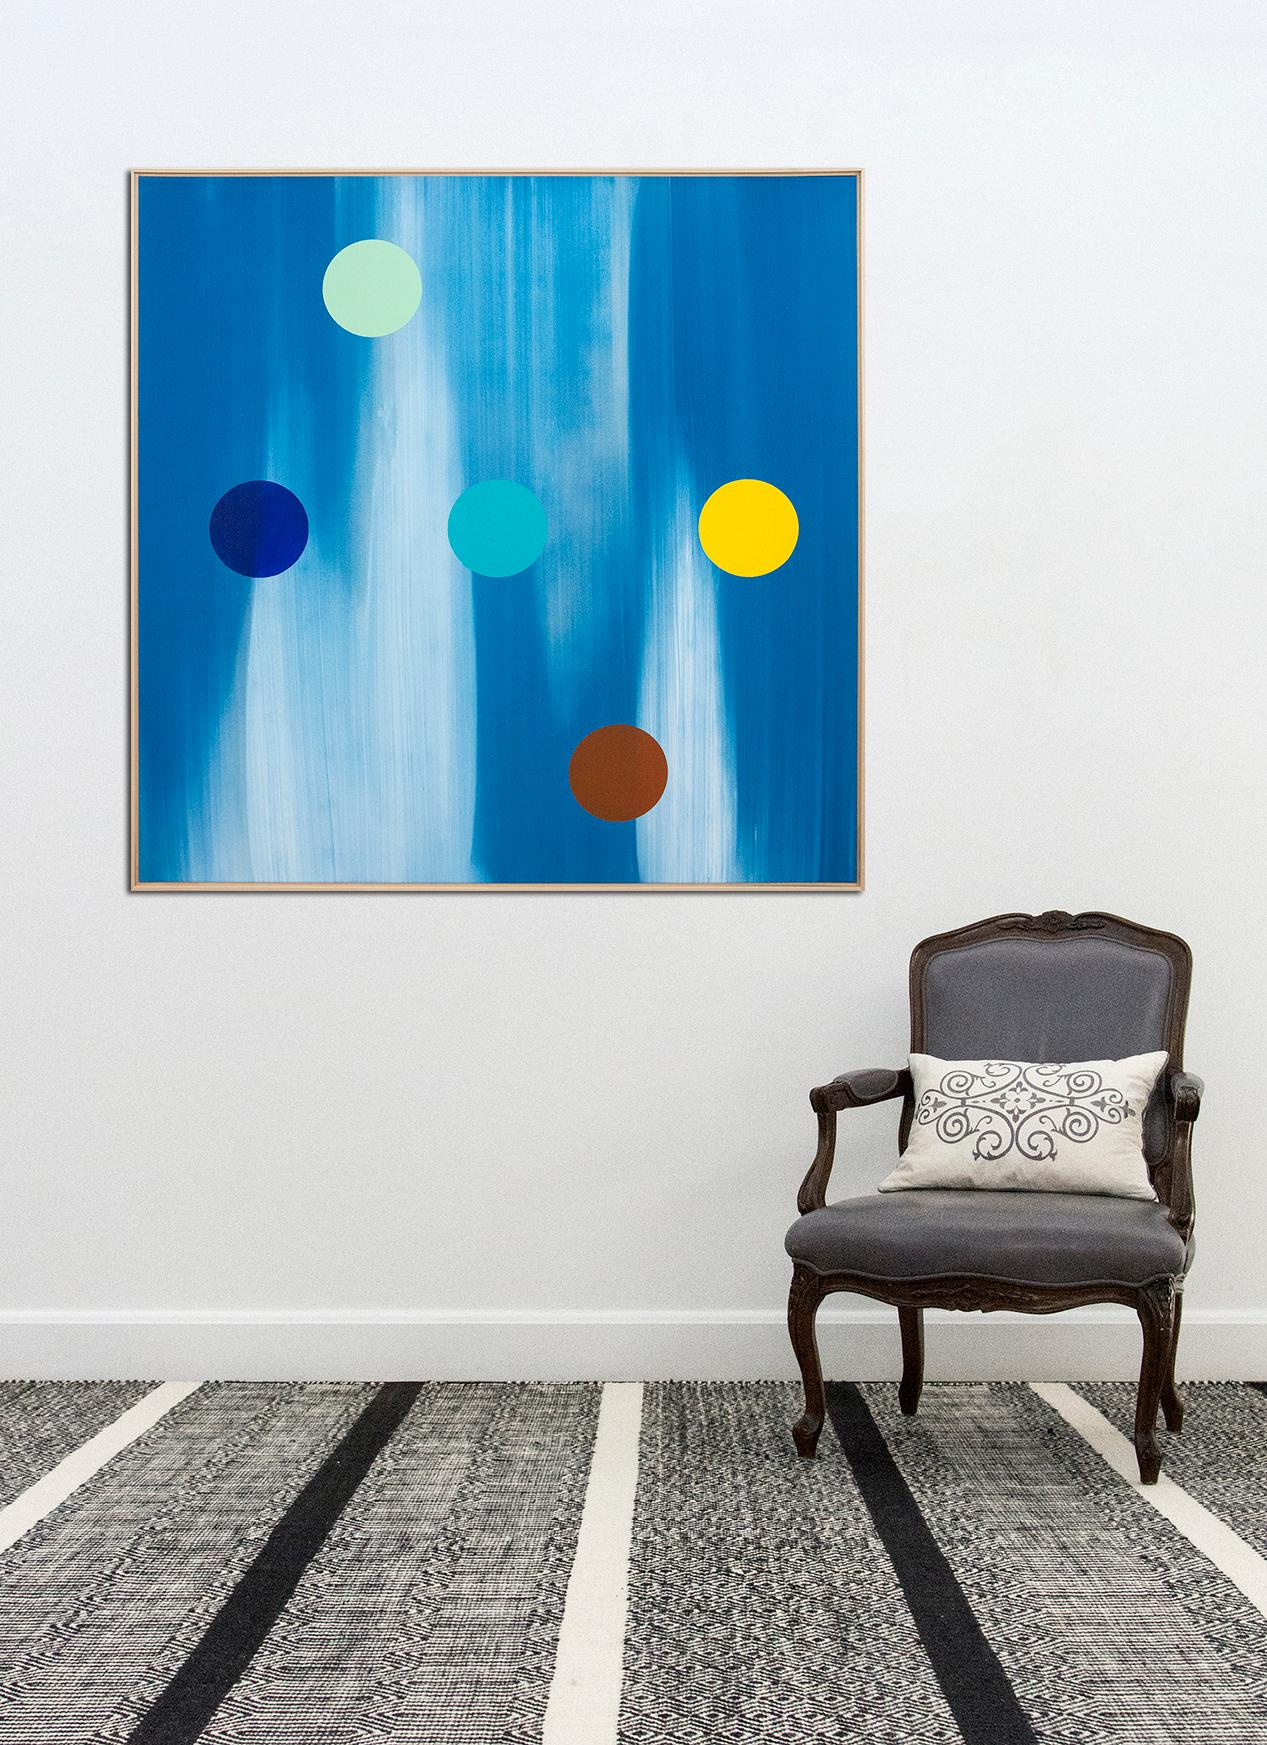 Mott Composition - large, bright, blue, geometric abstraction, acrylic on canvas - Blue Abstract Painting by Milly Ristvedt